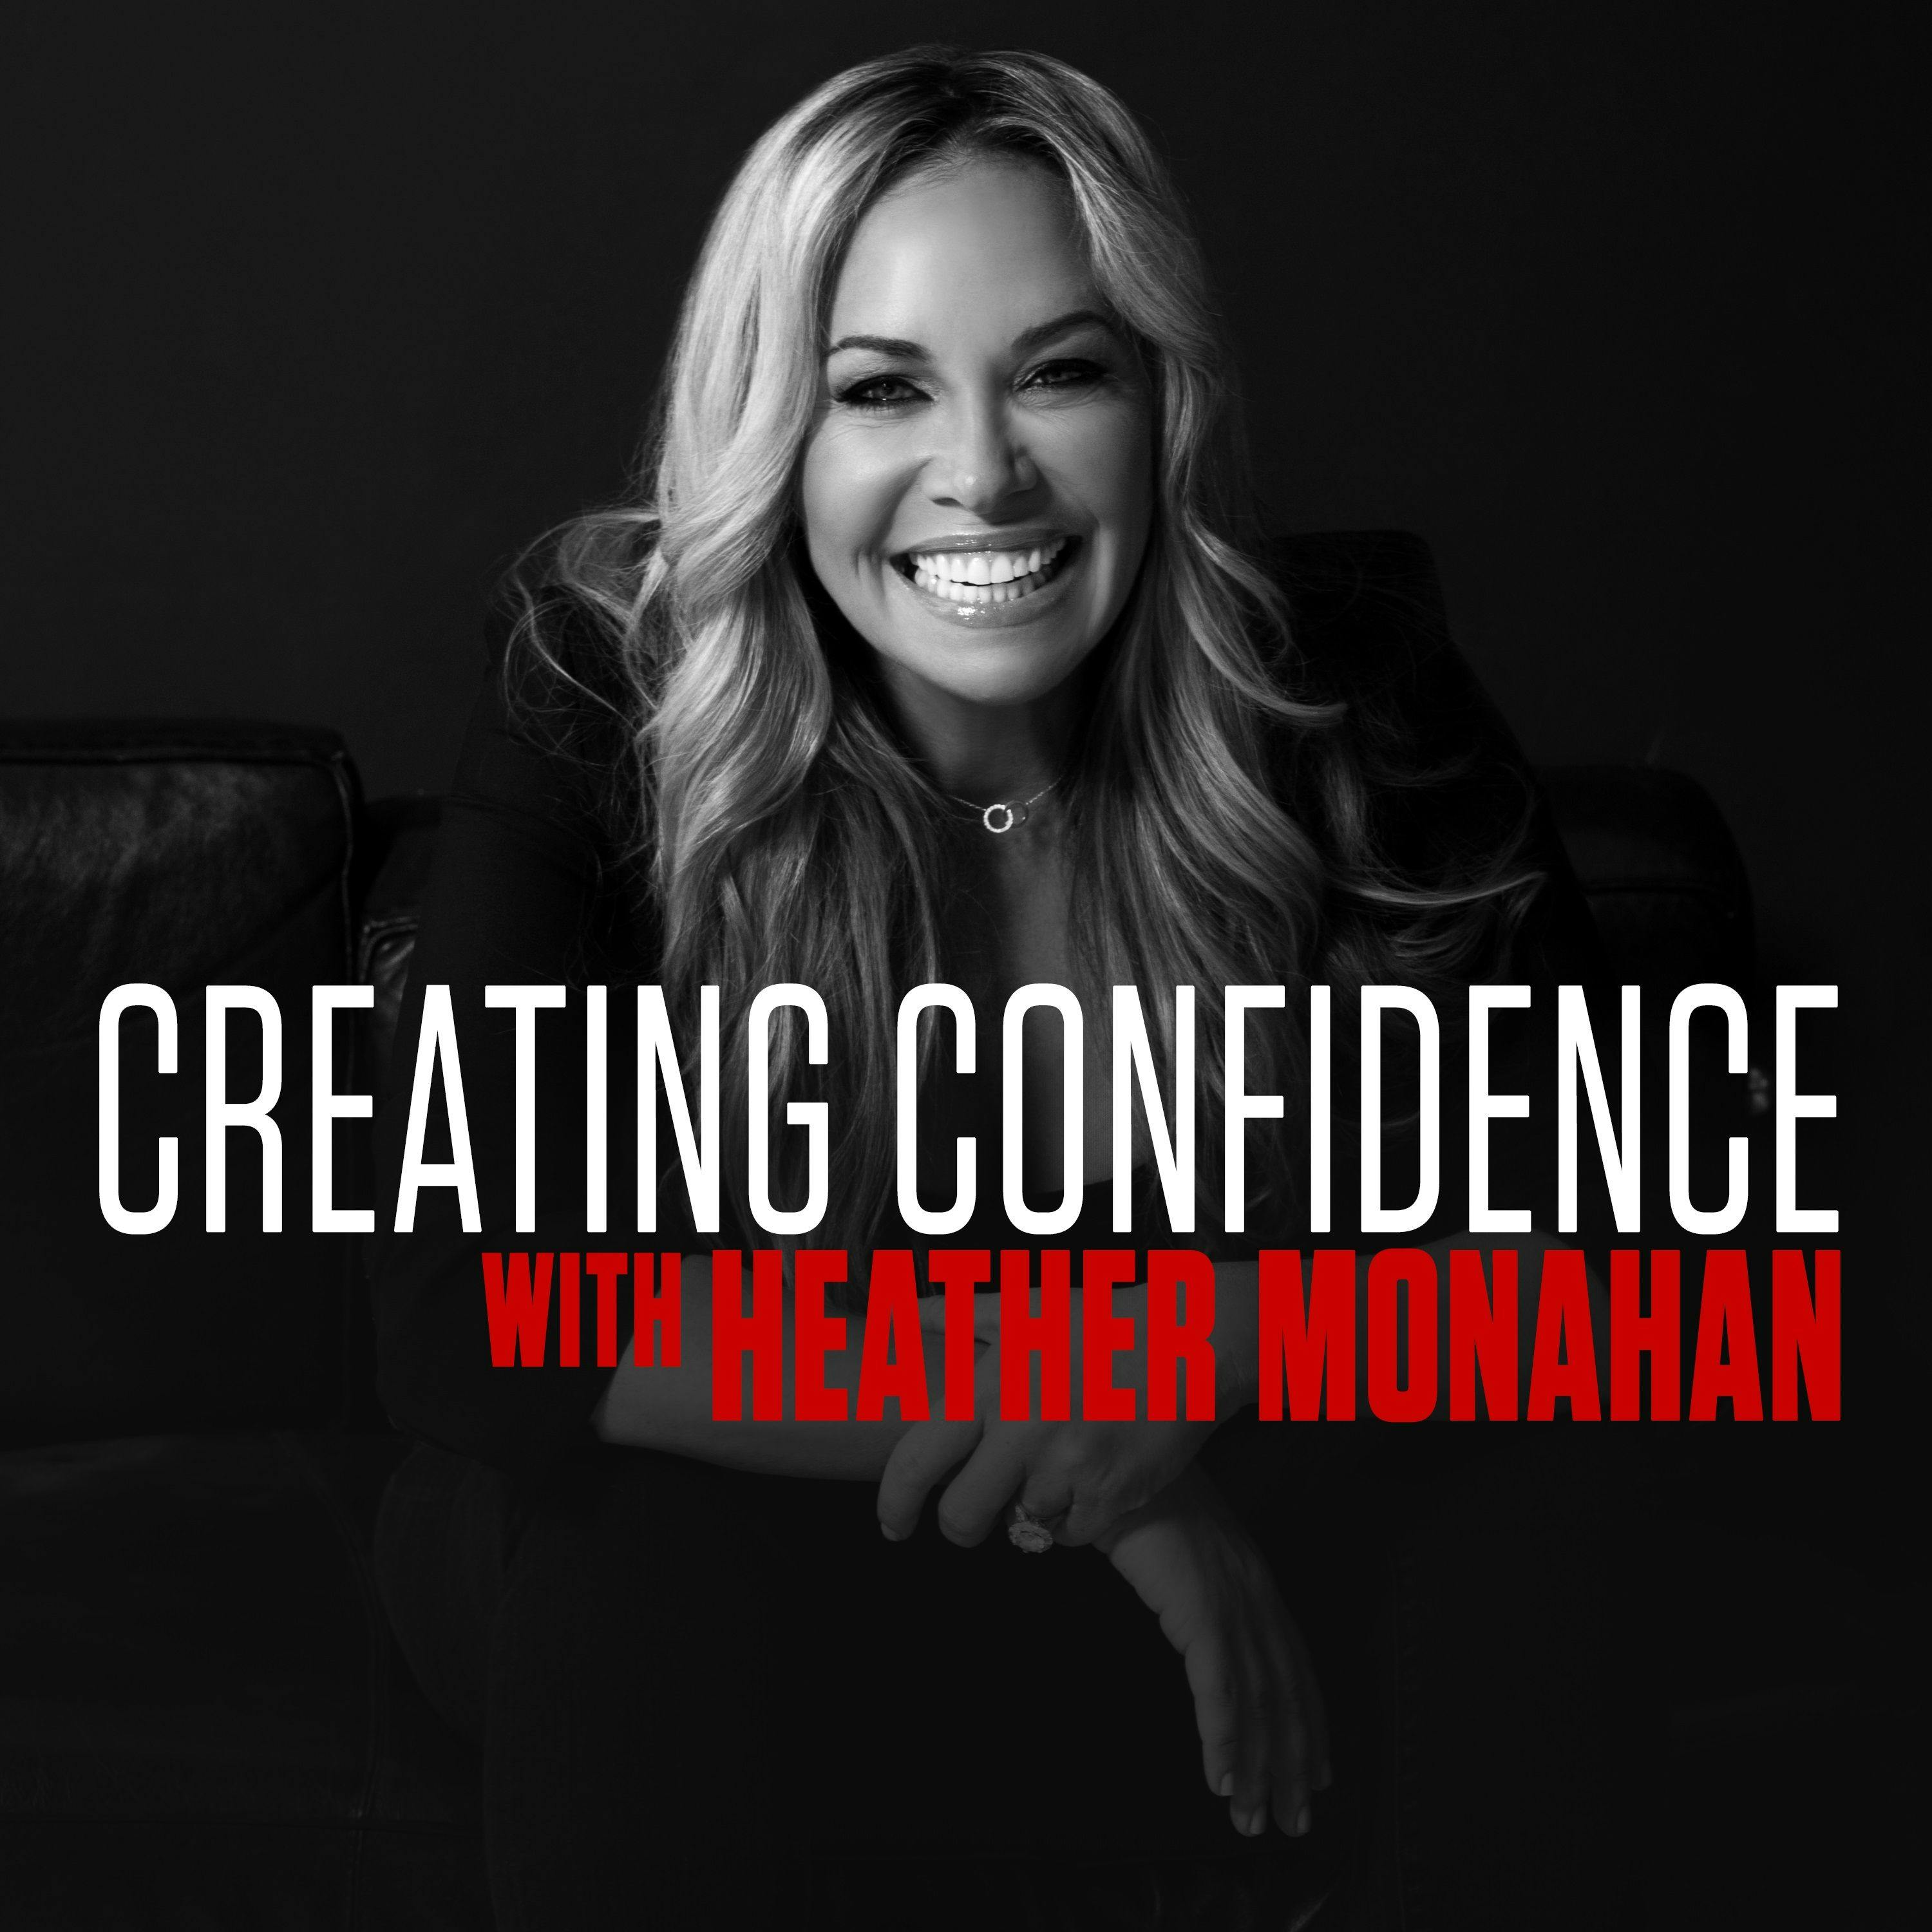 #13: The Positives We Can Take From It with JT McCormick by Heather Monahan | YAP Media Network